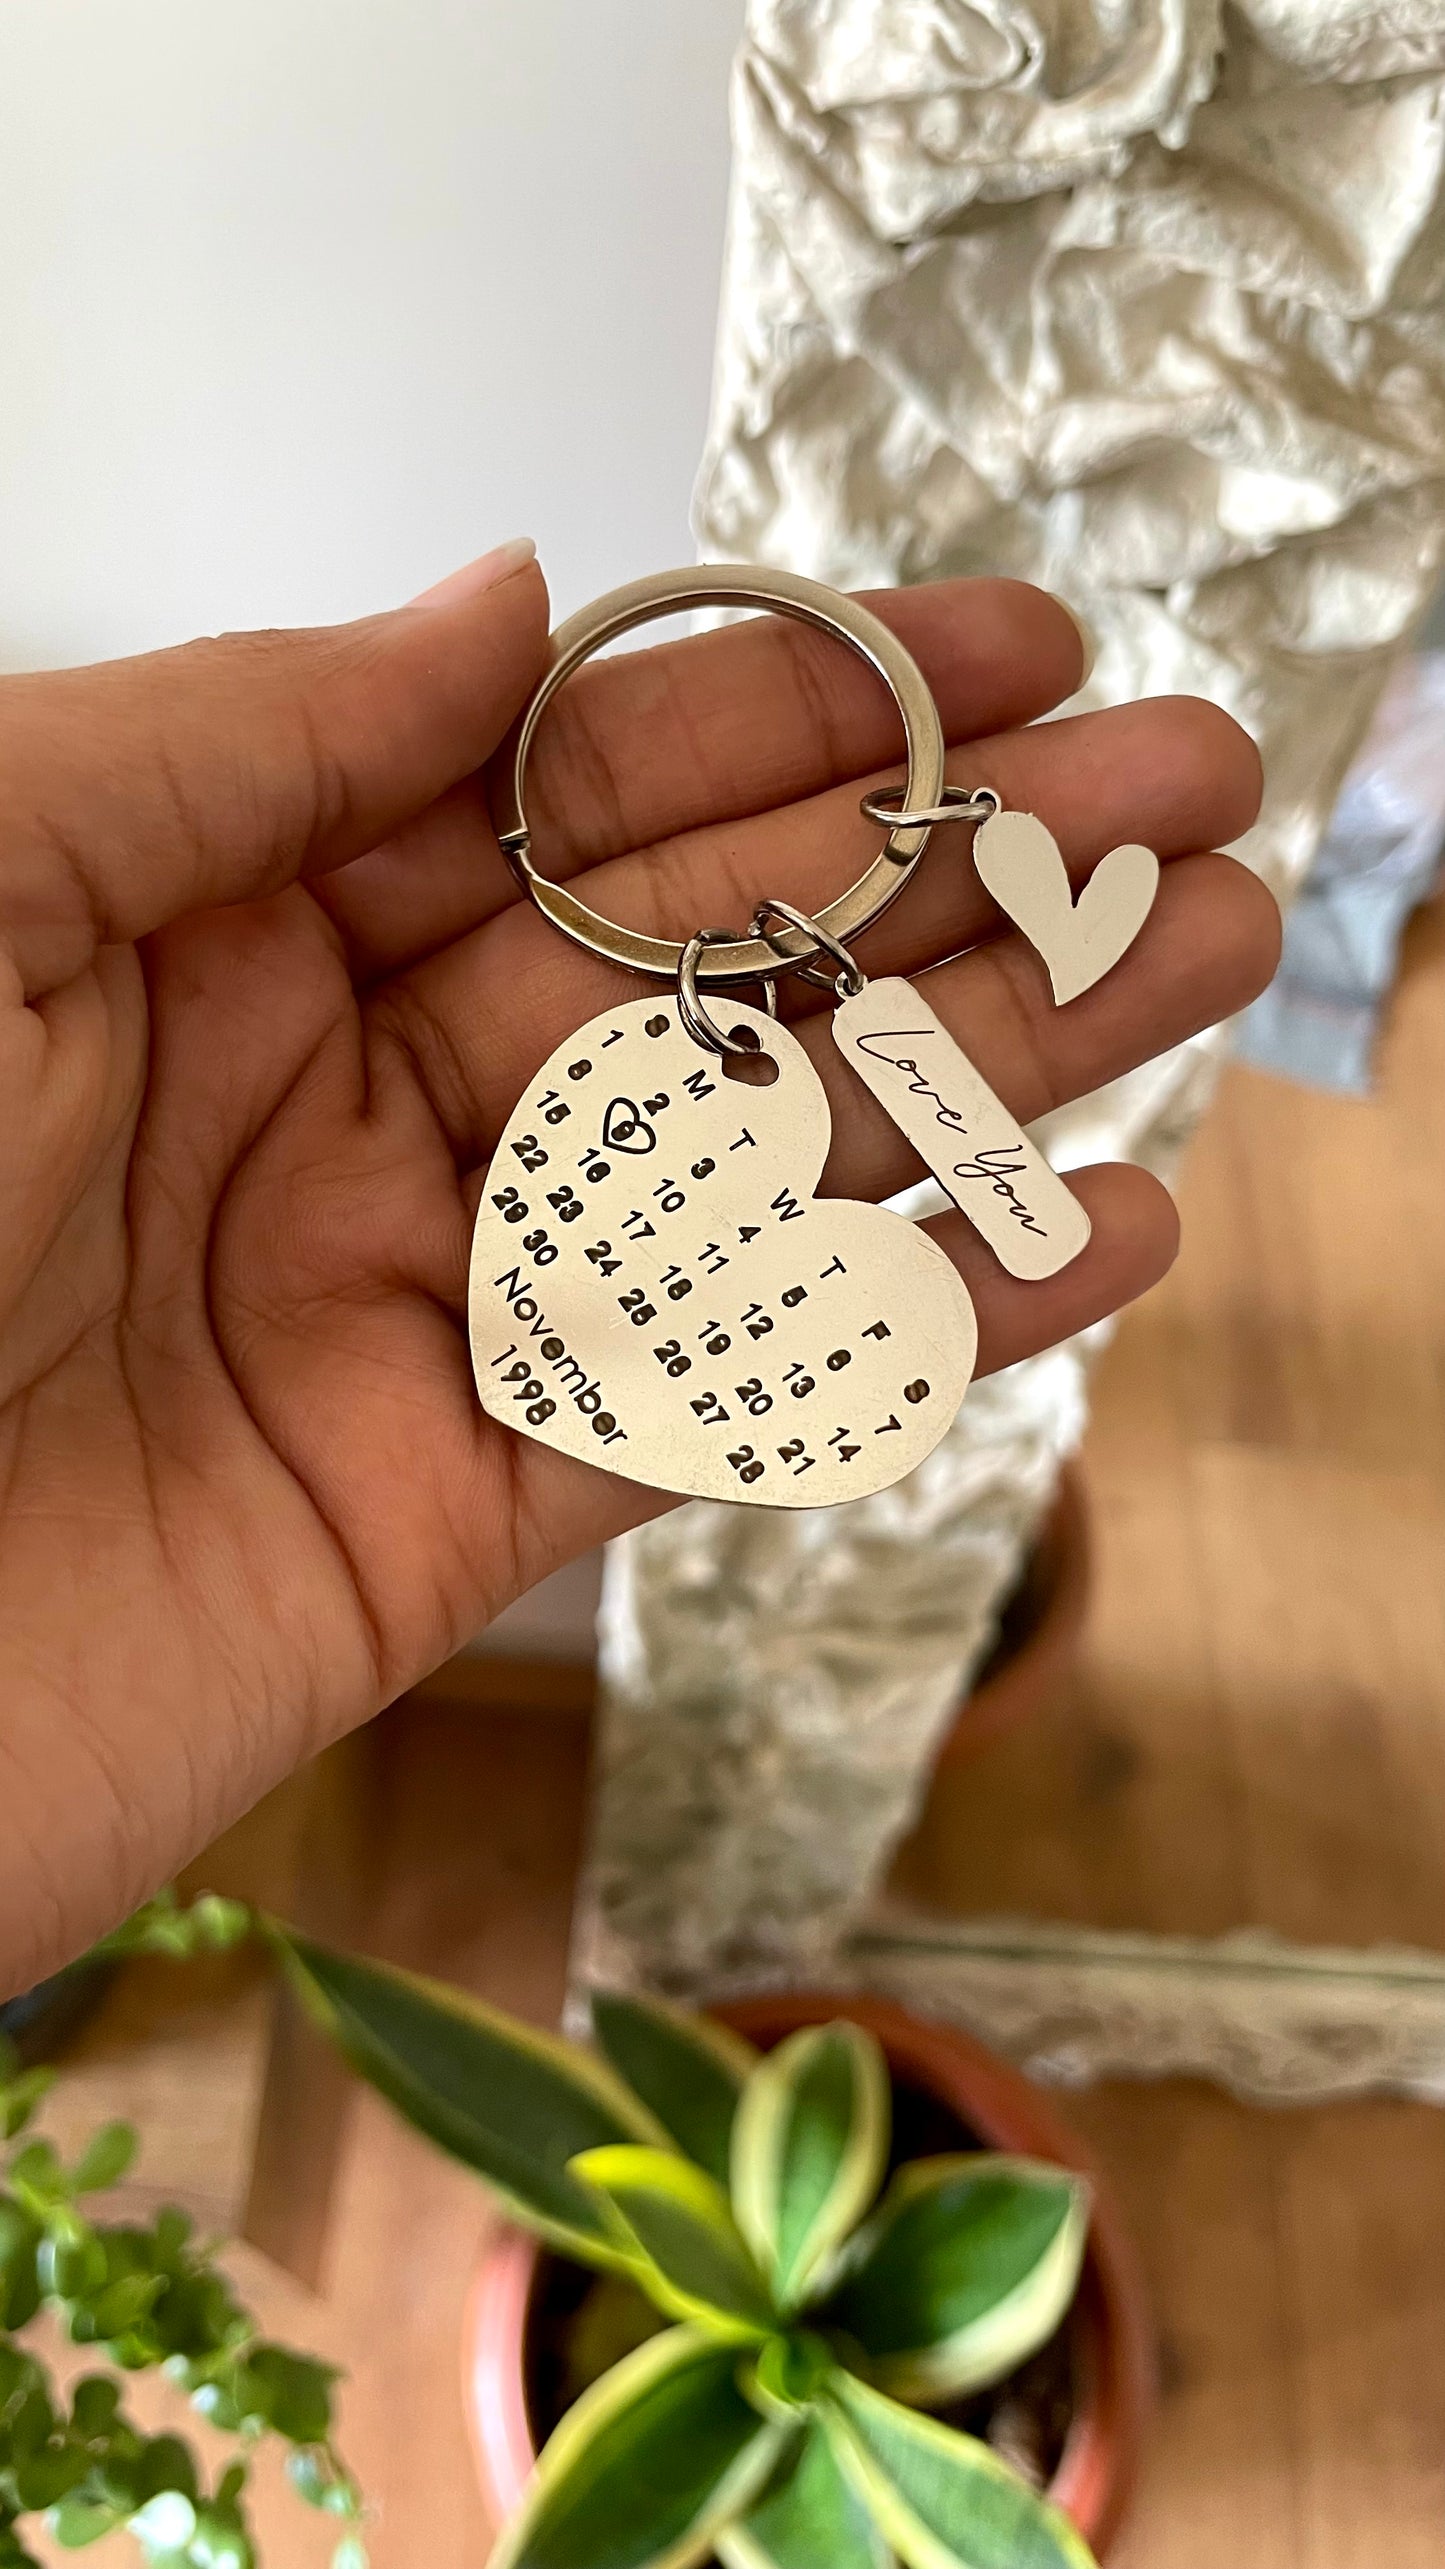 Personalised Calendar Keychain with charms